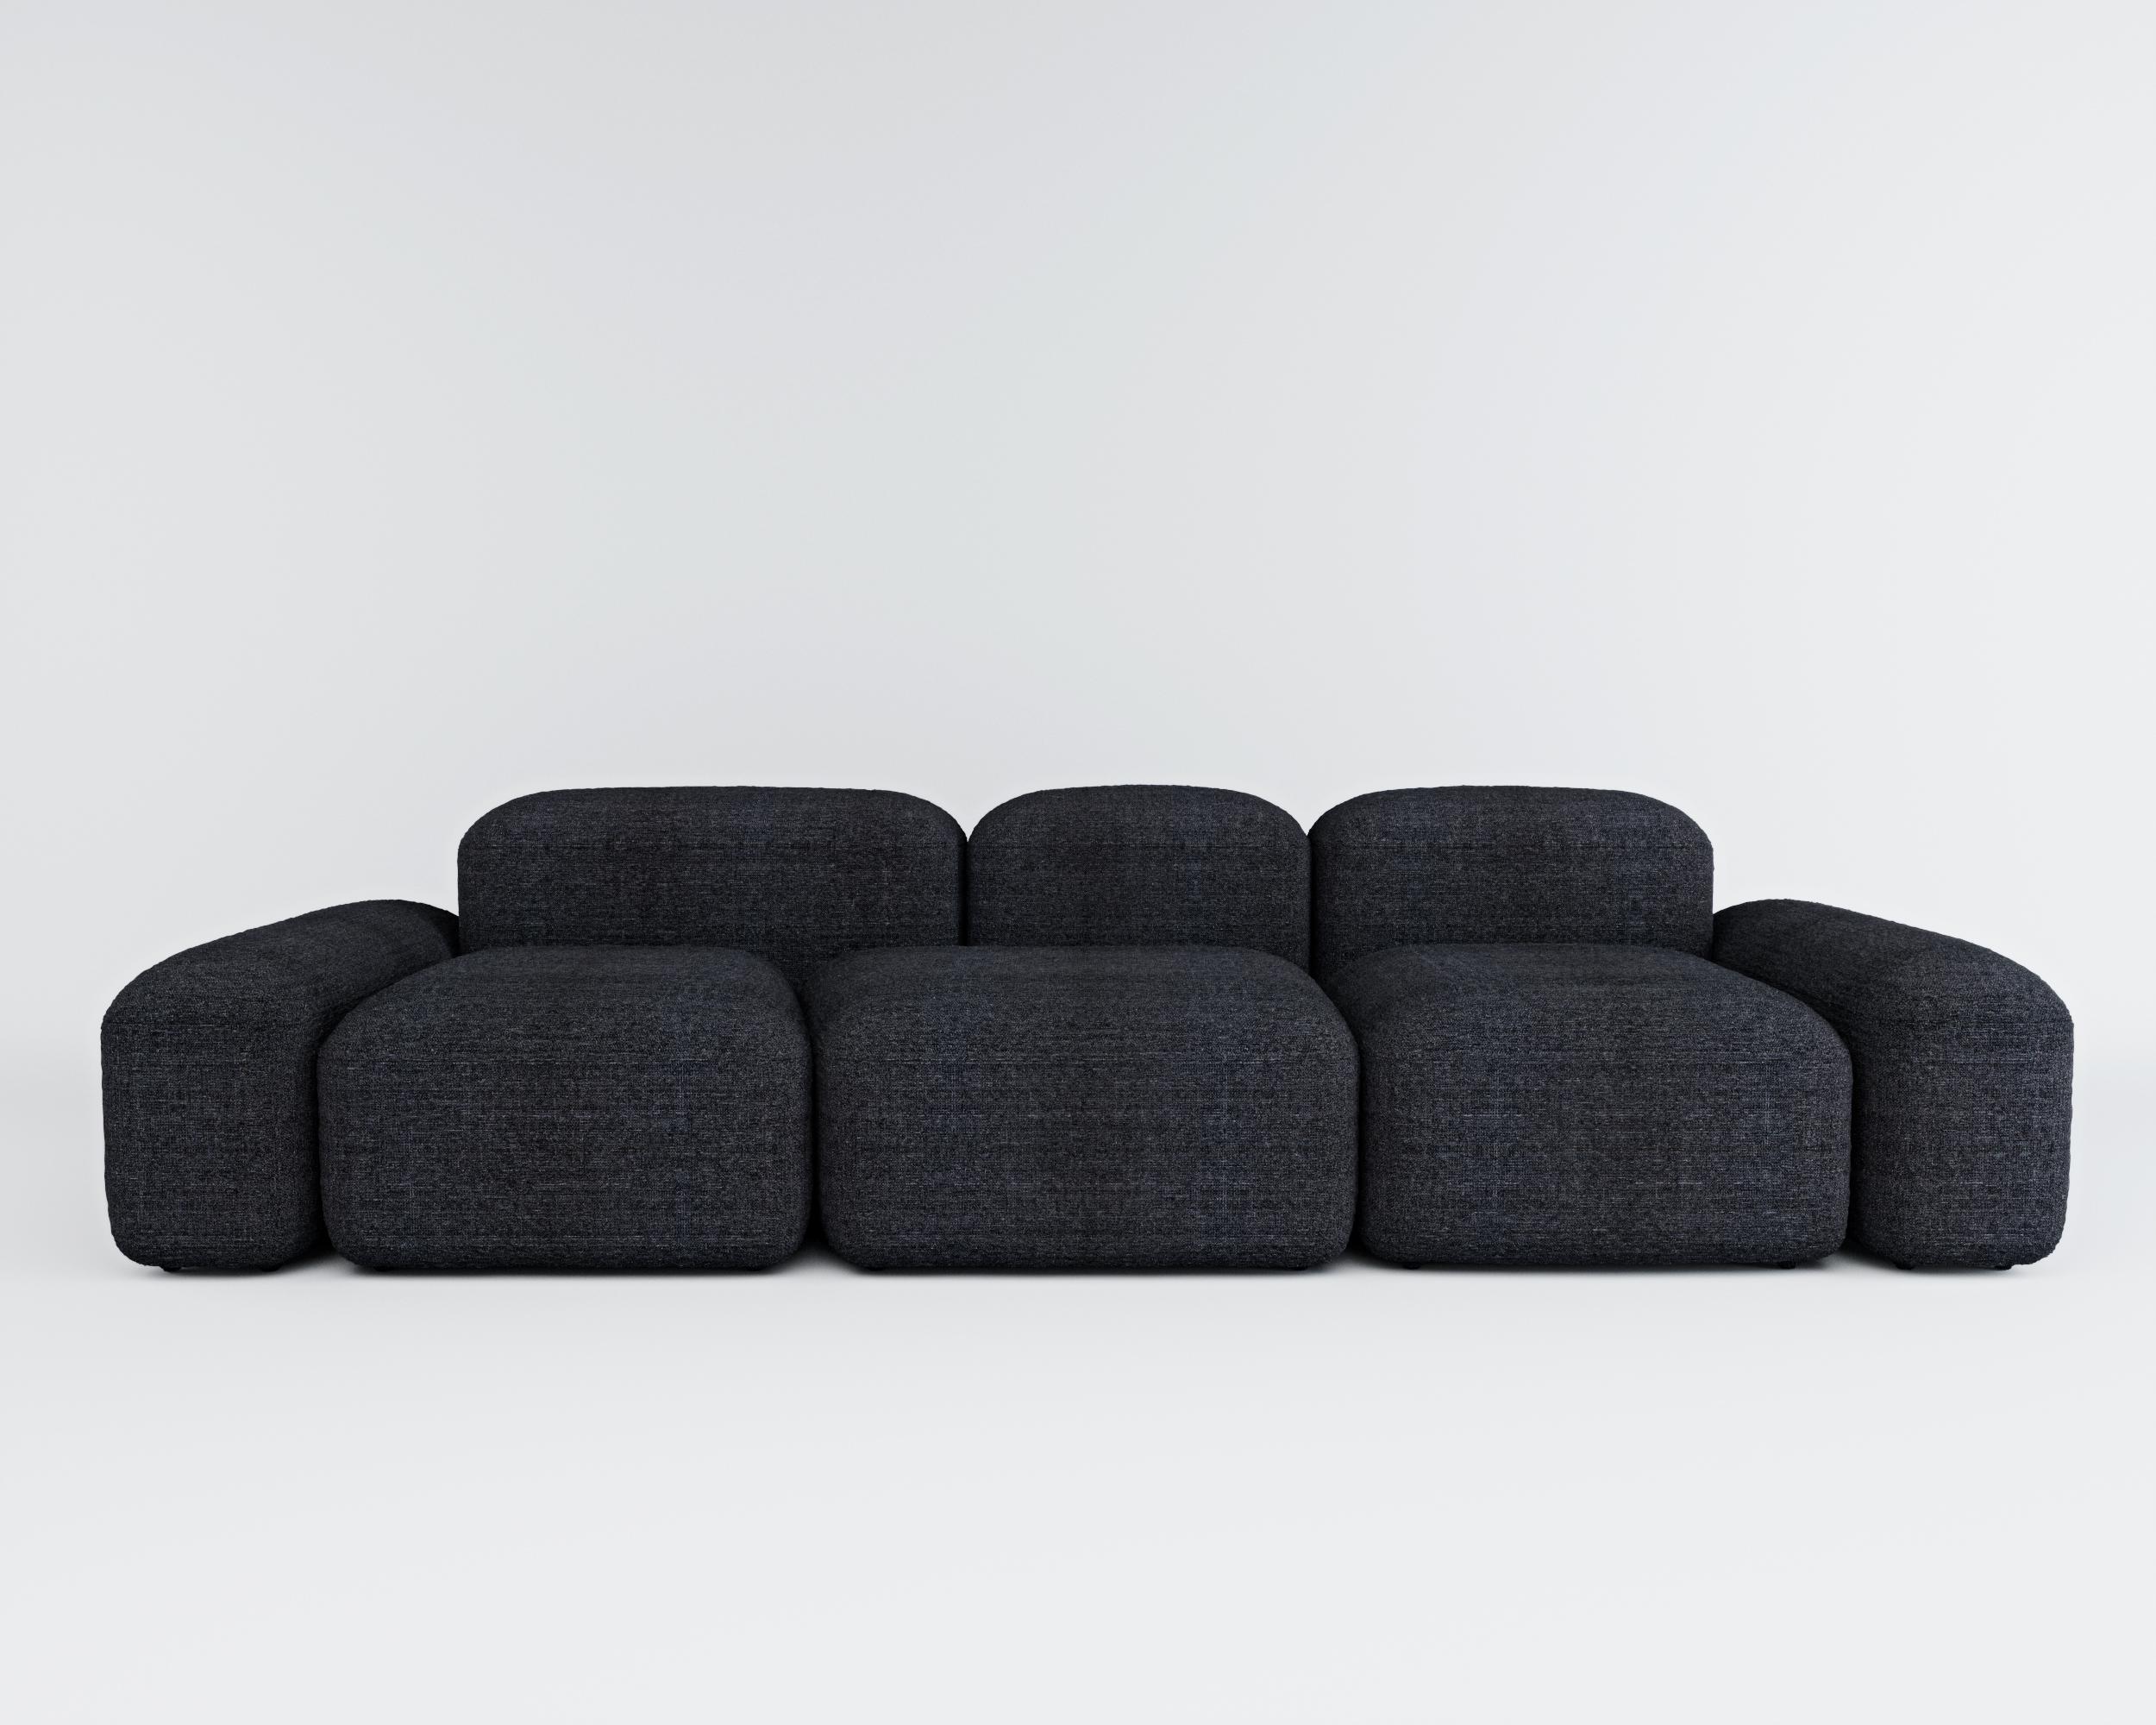 'Lapis' is a collection of sofas and seats with very organic and Minimalist shapes.
Designer: Emanuel Gargano
Maker: Amura Lab  

Lapis 296
3-4 seat / 296cm L

'Lapis' can be made in several dimension and combinations, according to spaces and